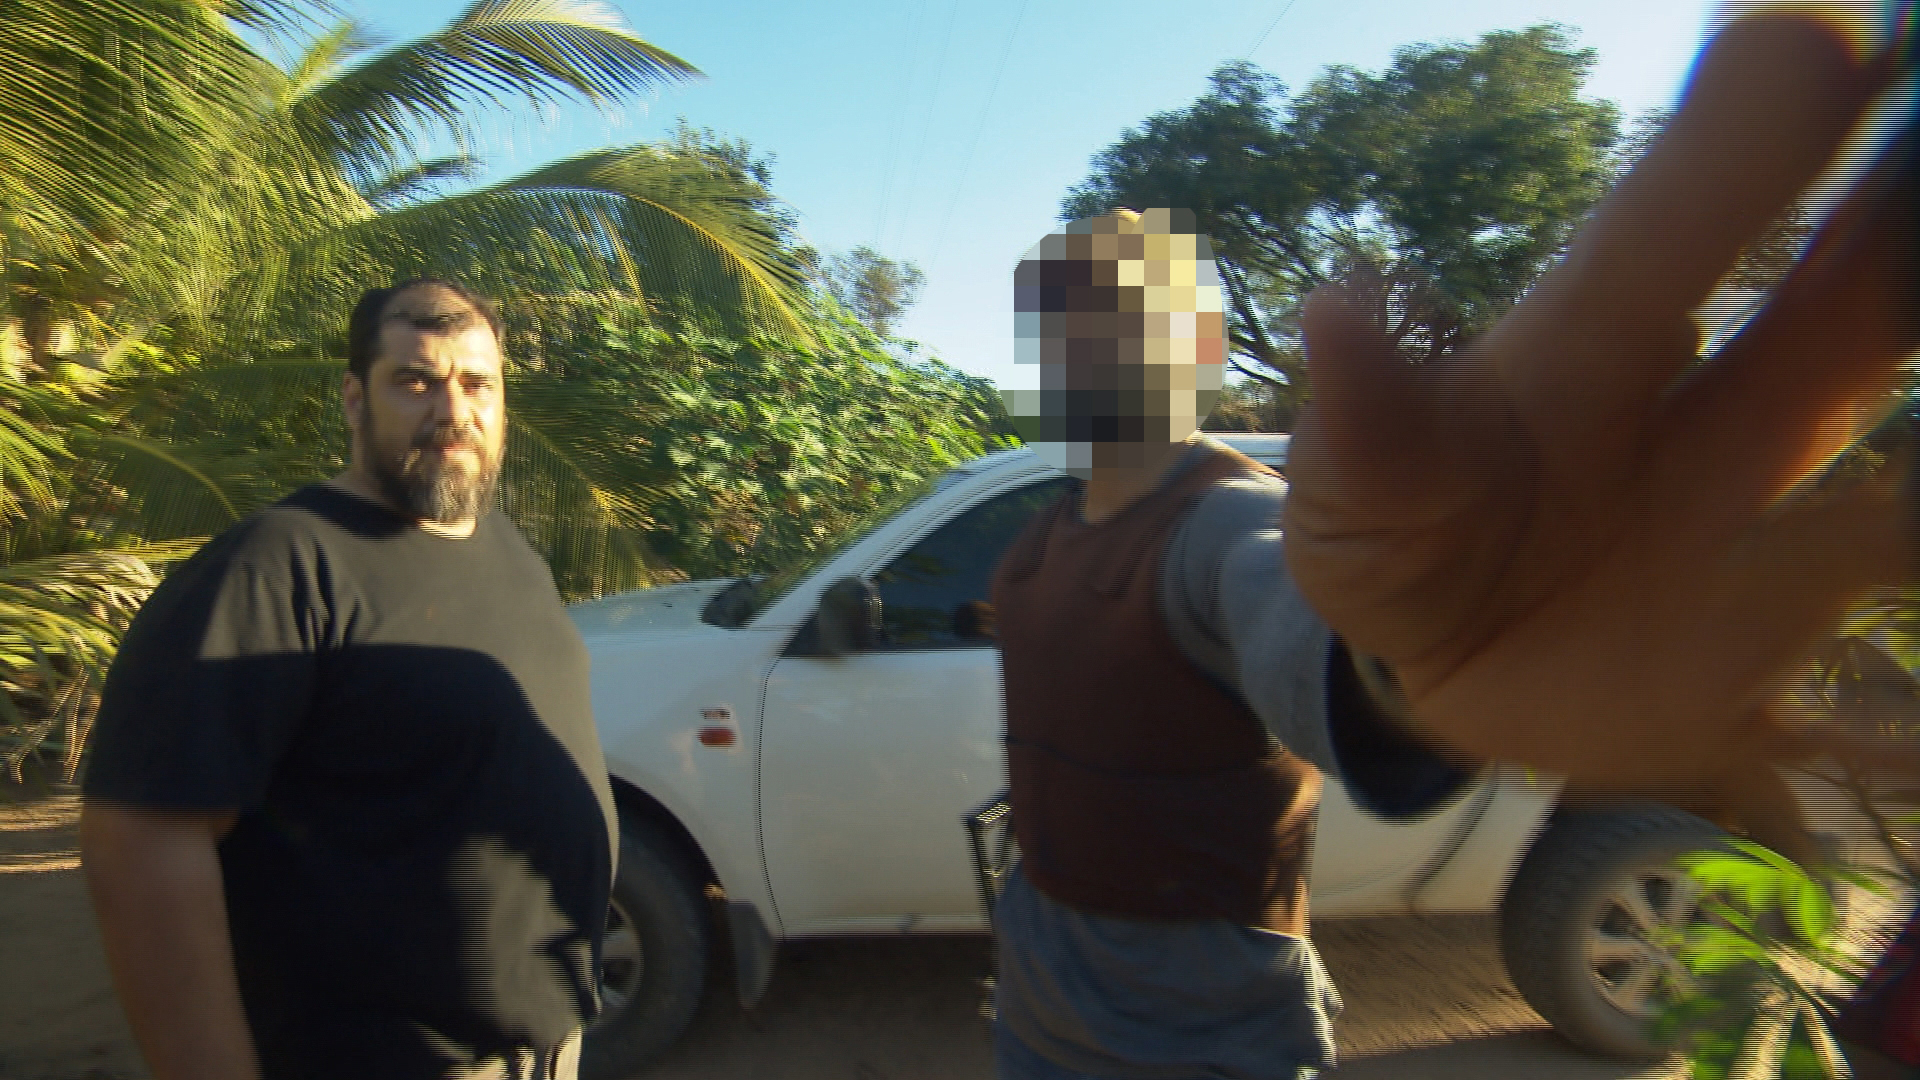 Two people stand in front of a car, with tropical foliage in the background. One, with their face pixelated, reaches out to obstruct the camera lens.